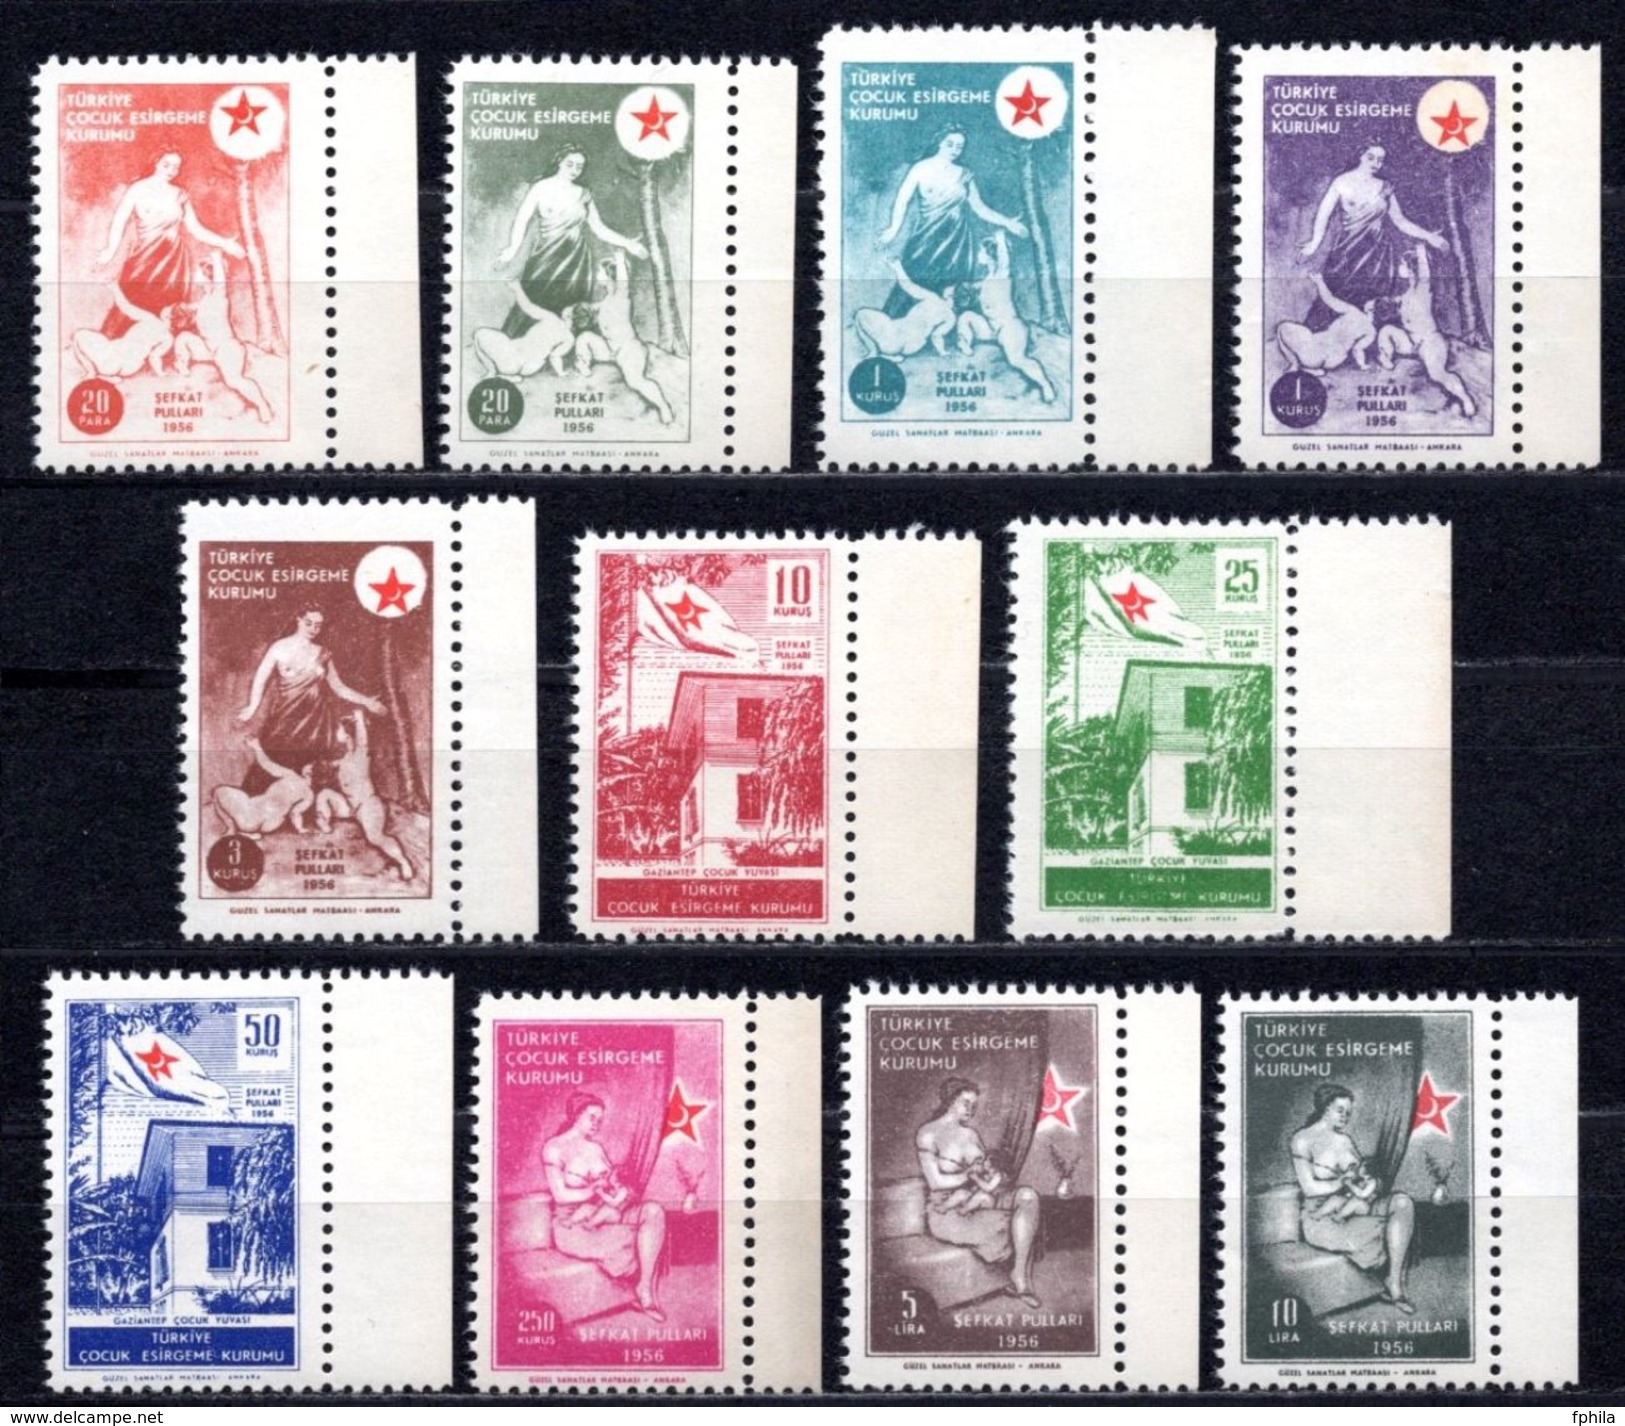 1956 TURKEY TURKISH SOCIETY FOR THE PROTECTION OF CHILDREN CHARITY STAMPS MNH ** - Sellos De Beneficiencia